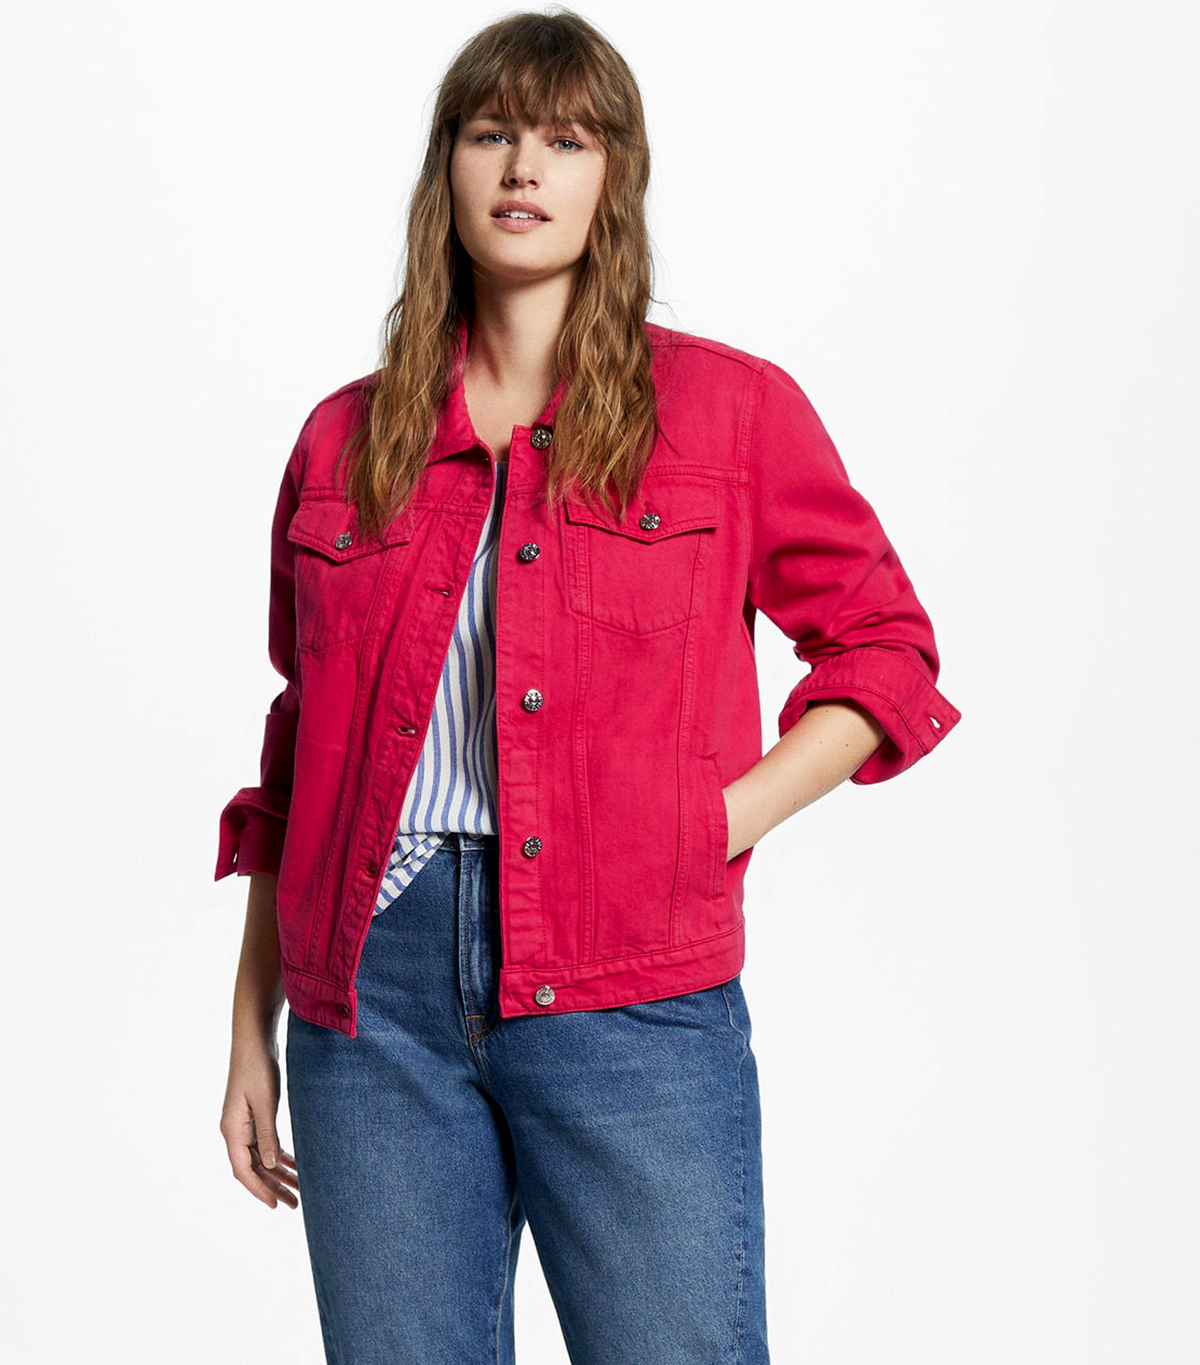 Red Denim Jacket Outfit Online Store ...